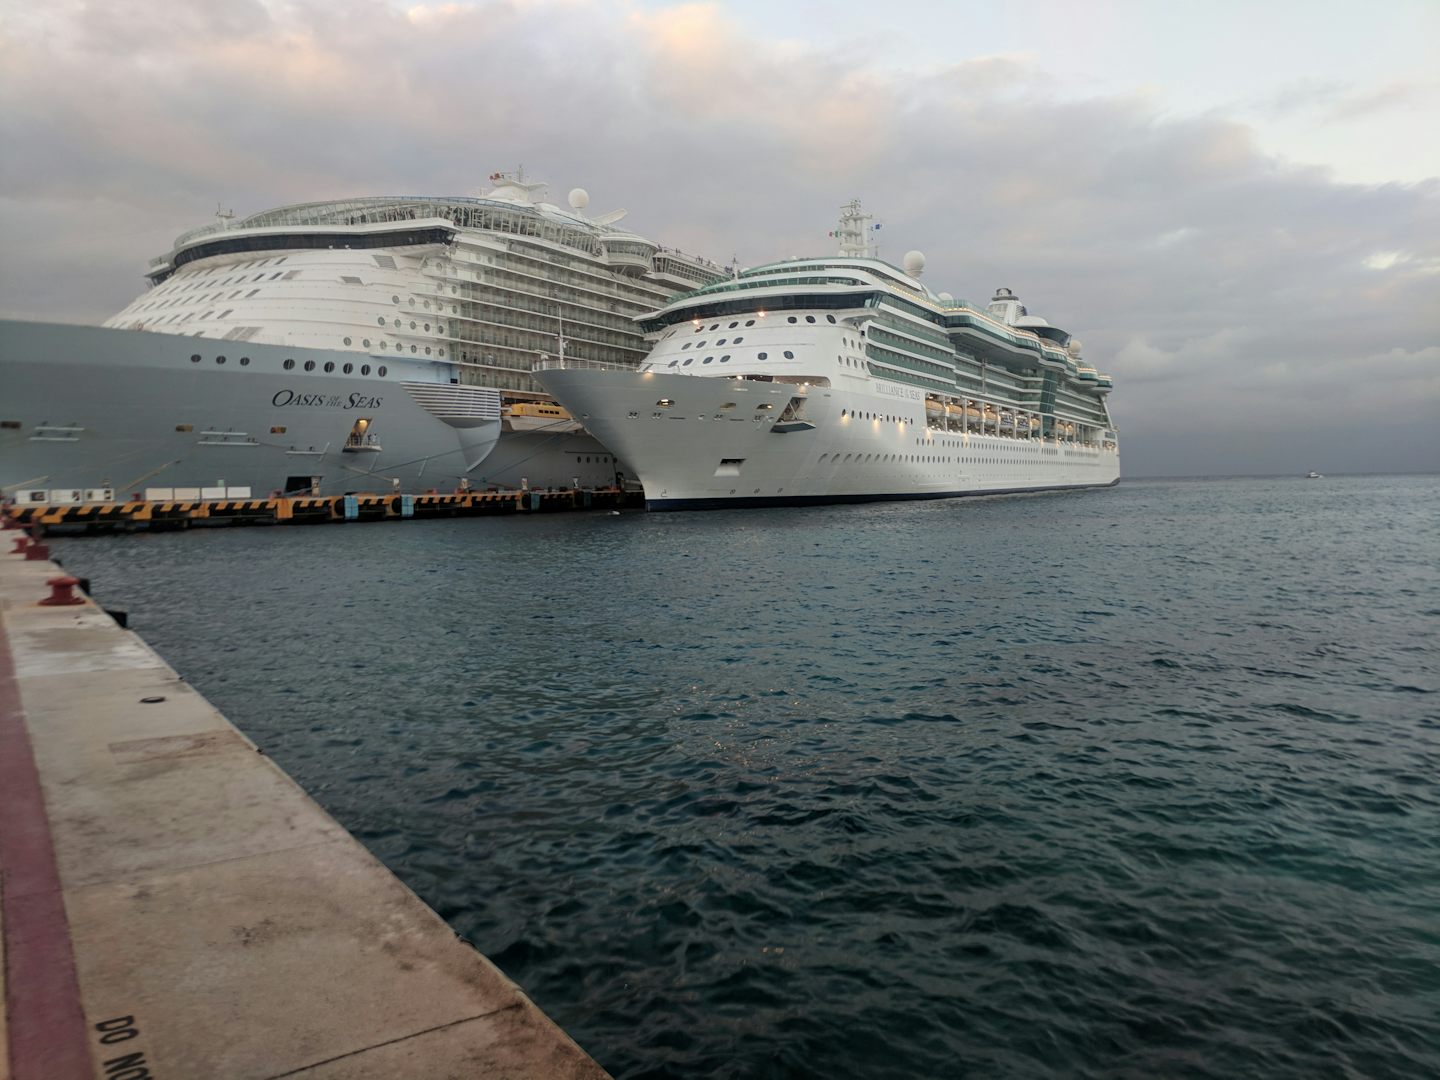 That is our ship "Brilliance of the Seas" on the right with "Oa